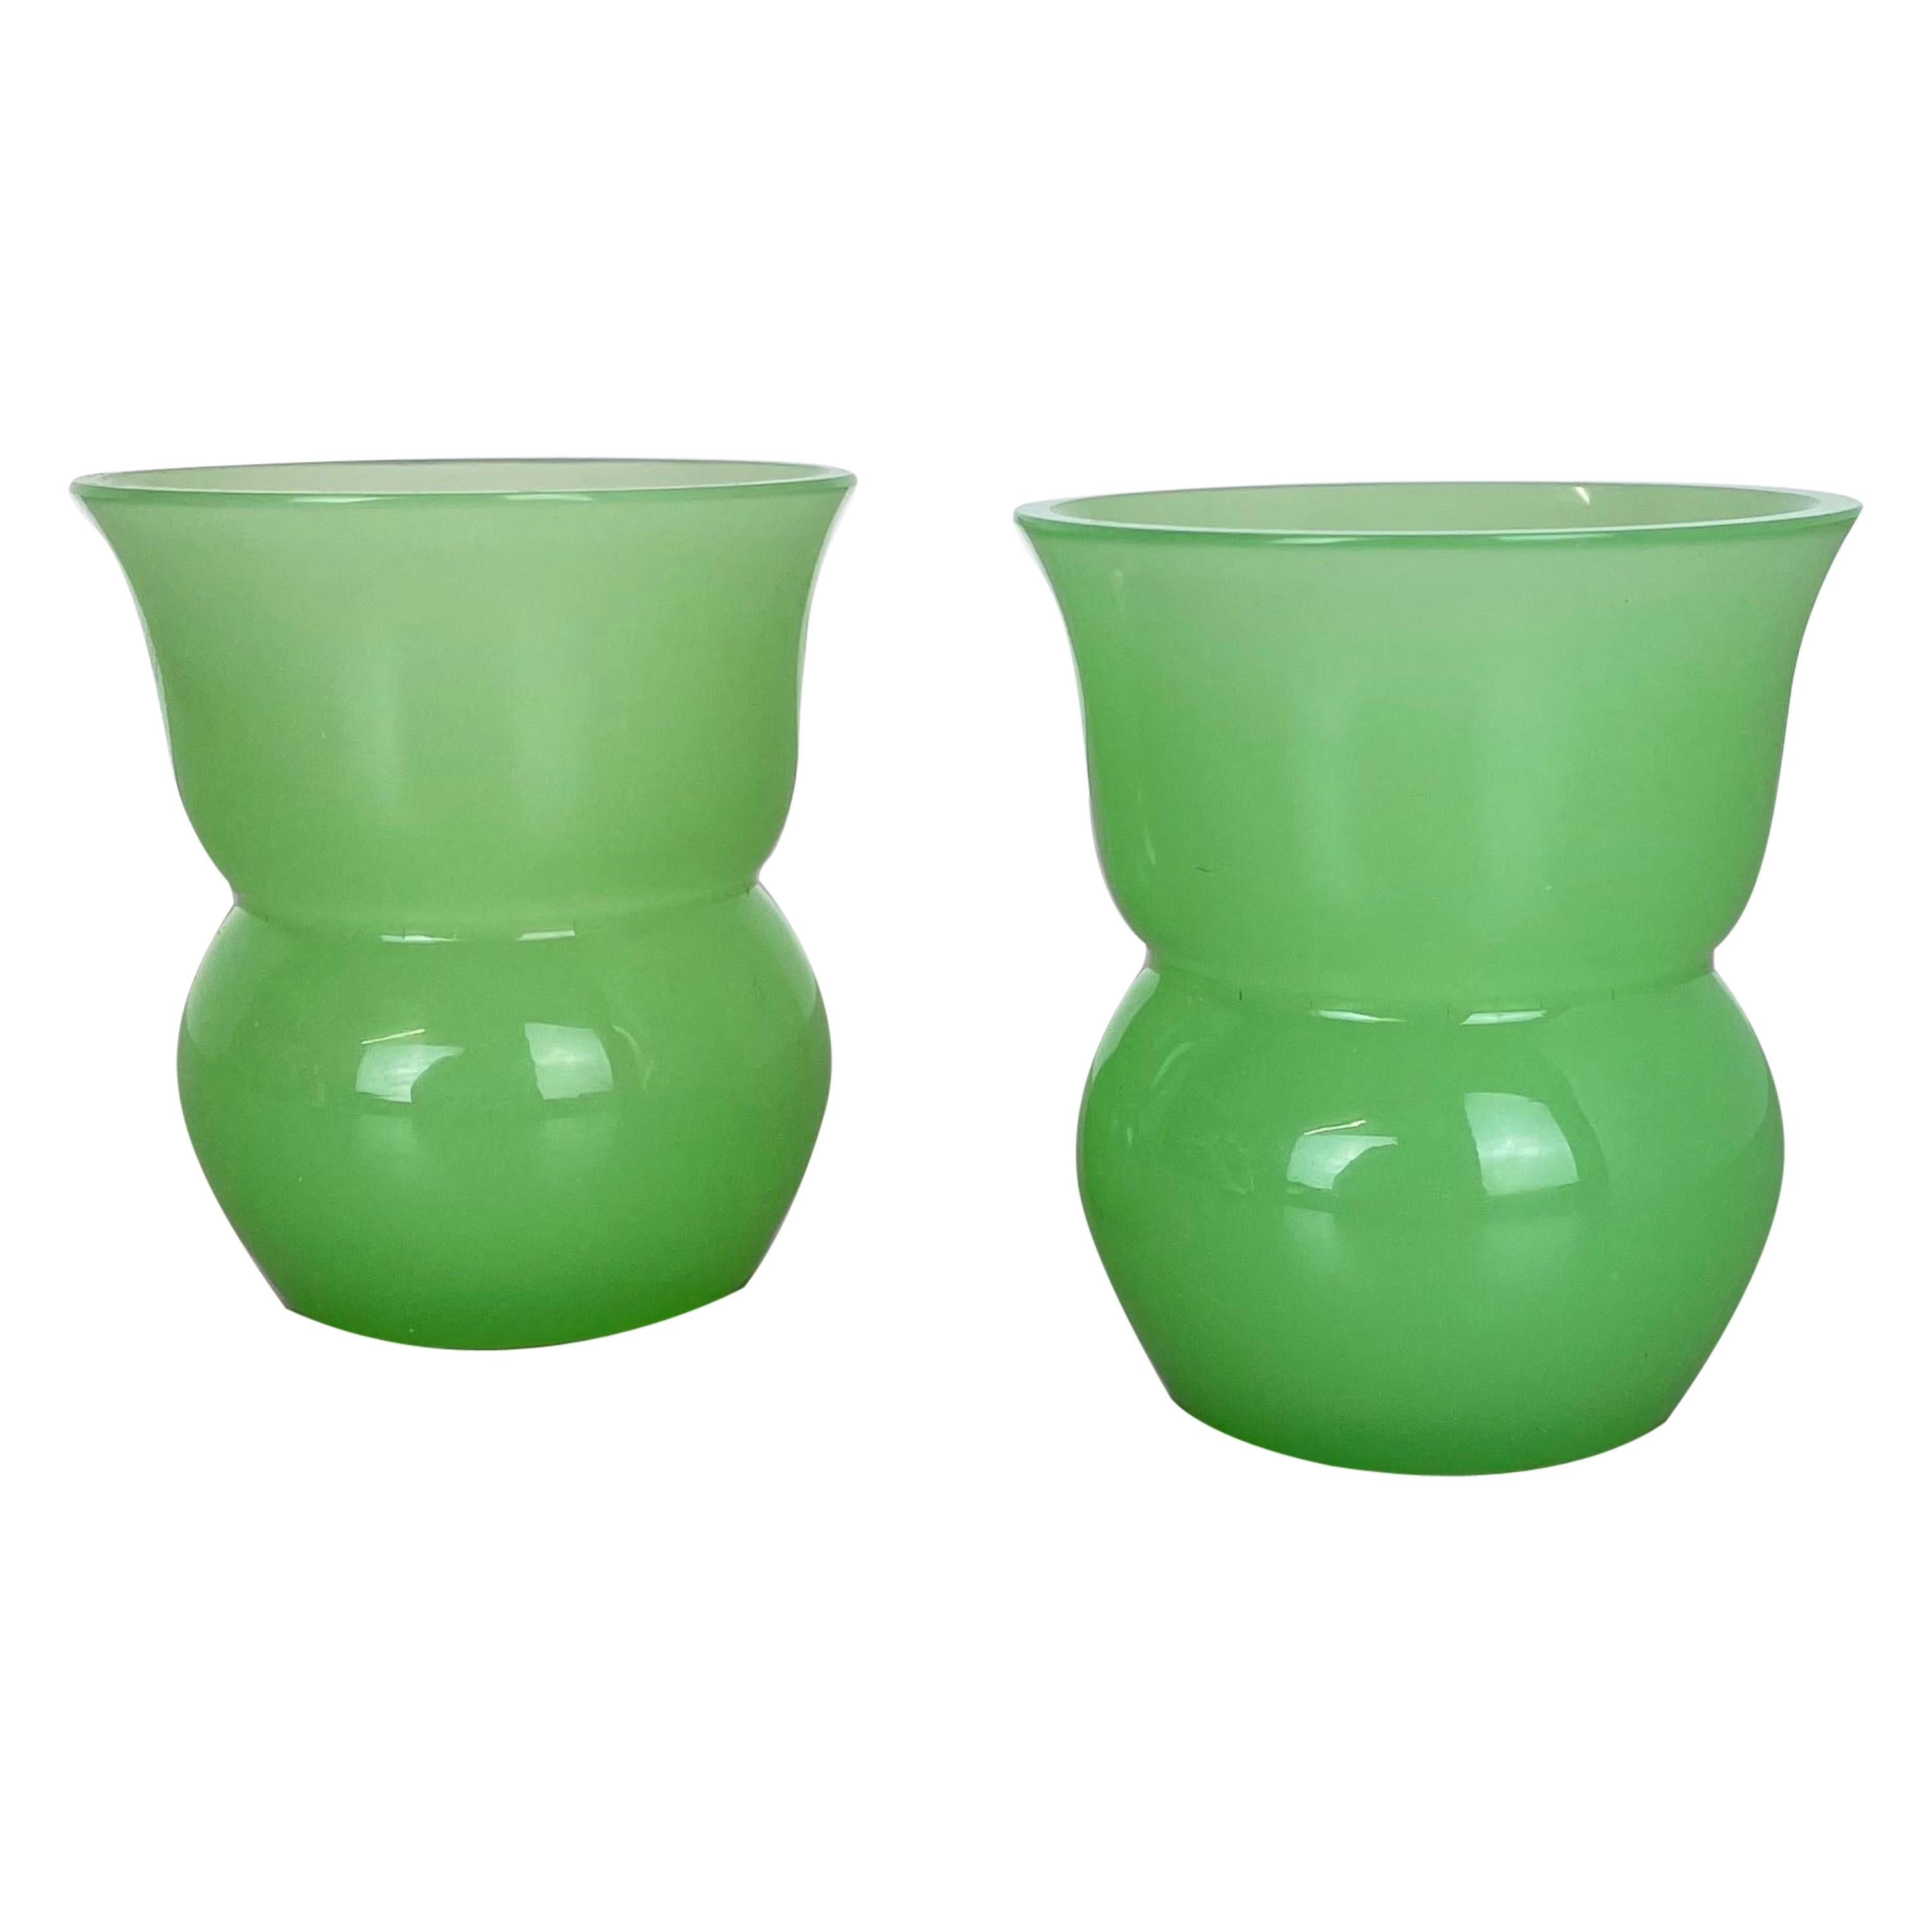 Set of 2 Green New Old Stock Murano Opaline Glass Vases by Gino Cenedese, 1960s For Sale